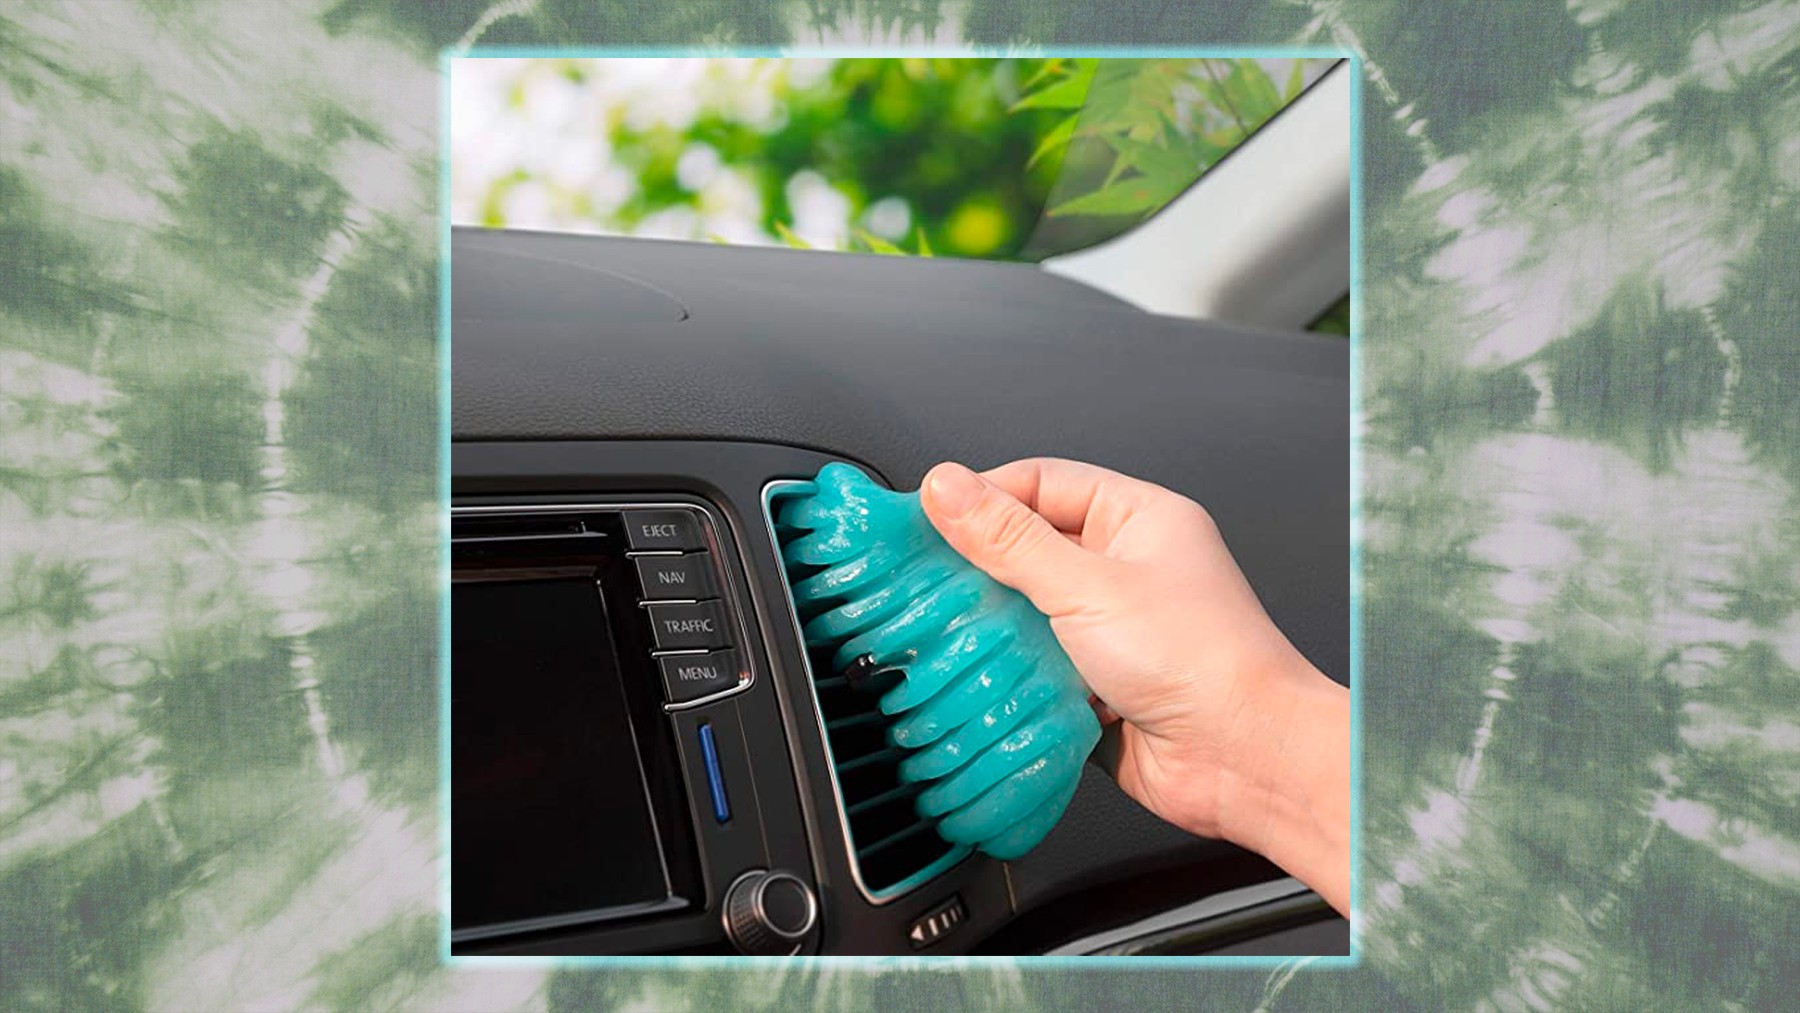 How to Make Car Cleaning Slime? - Quick and Easy Steps